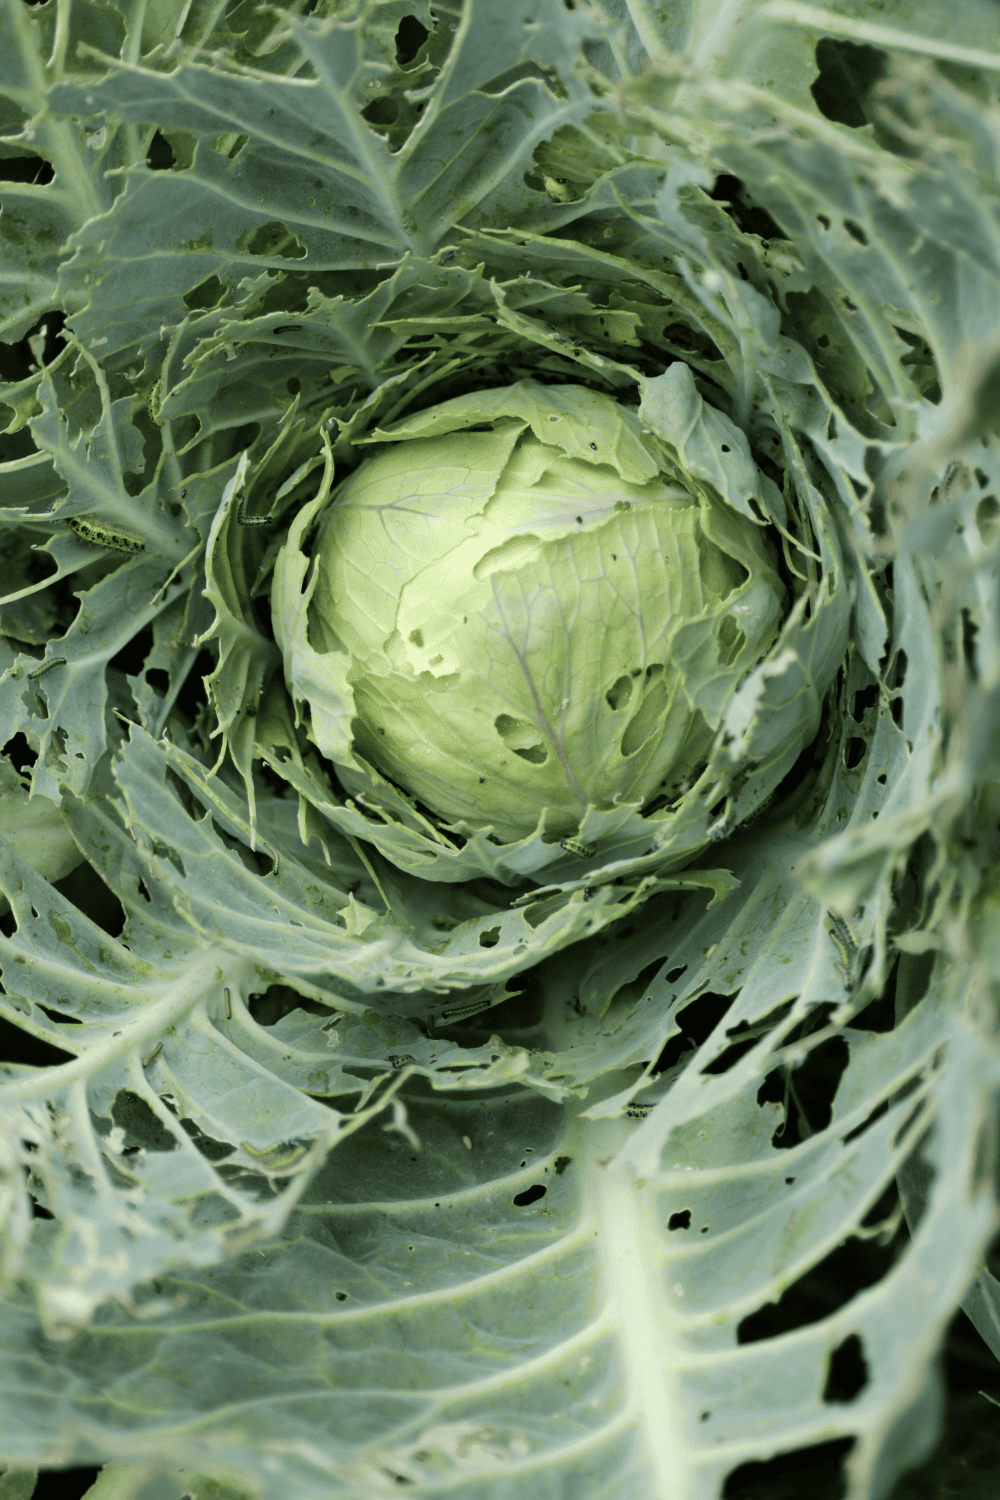 How to Get Rid of Cabbage Worms Naturally